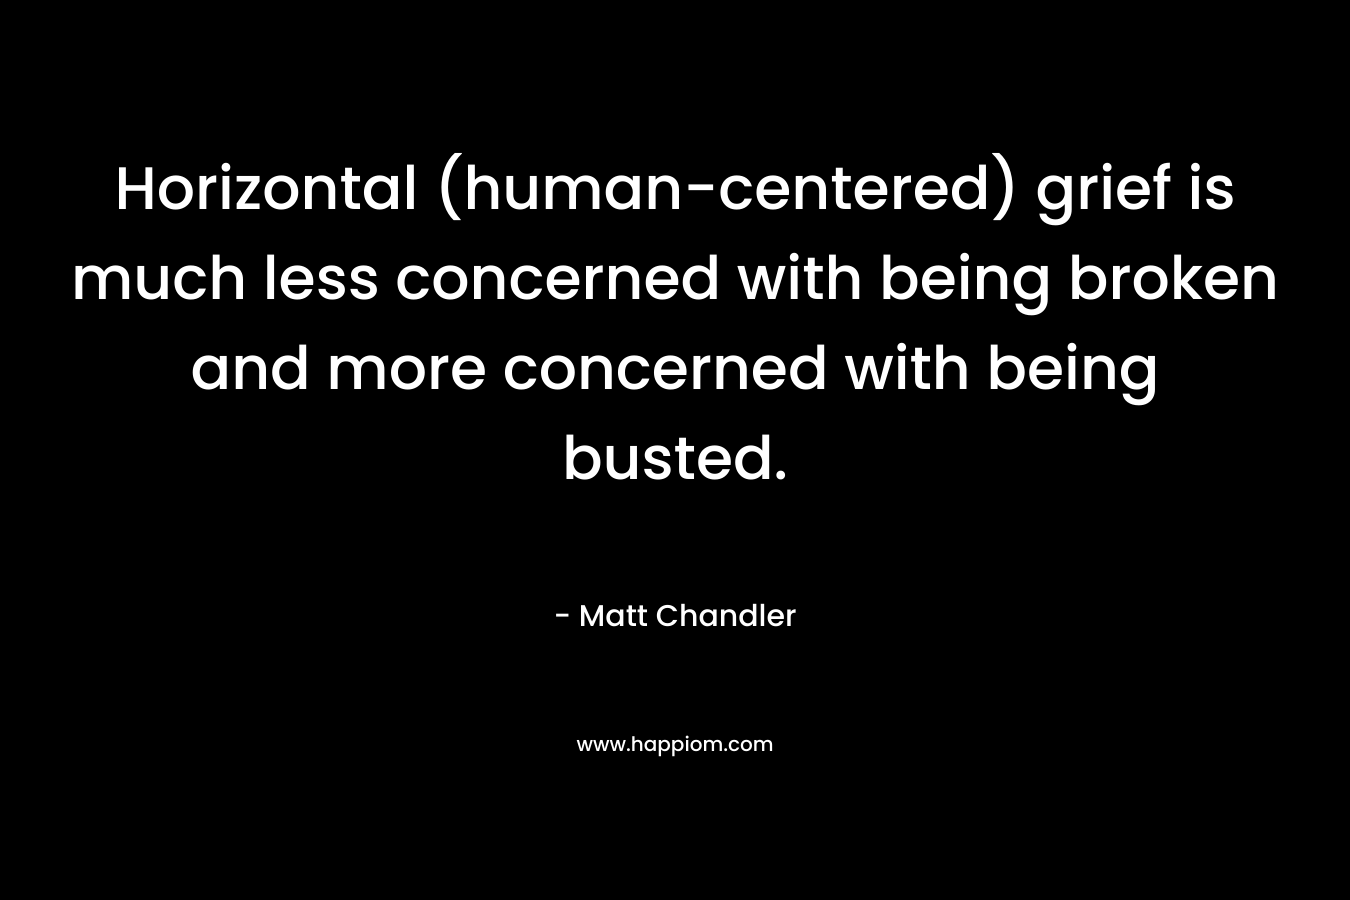 Horizontal (human-centered) grief is much less concerned with being broken and more concerned with being busted.